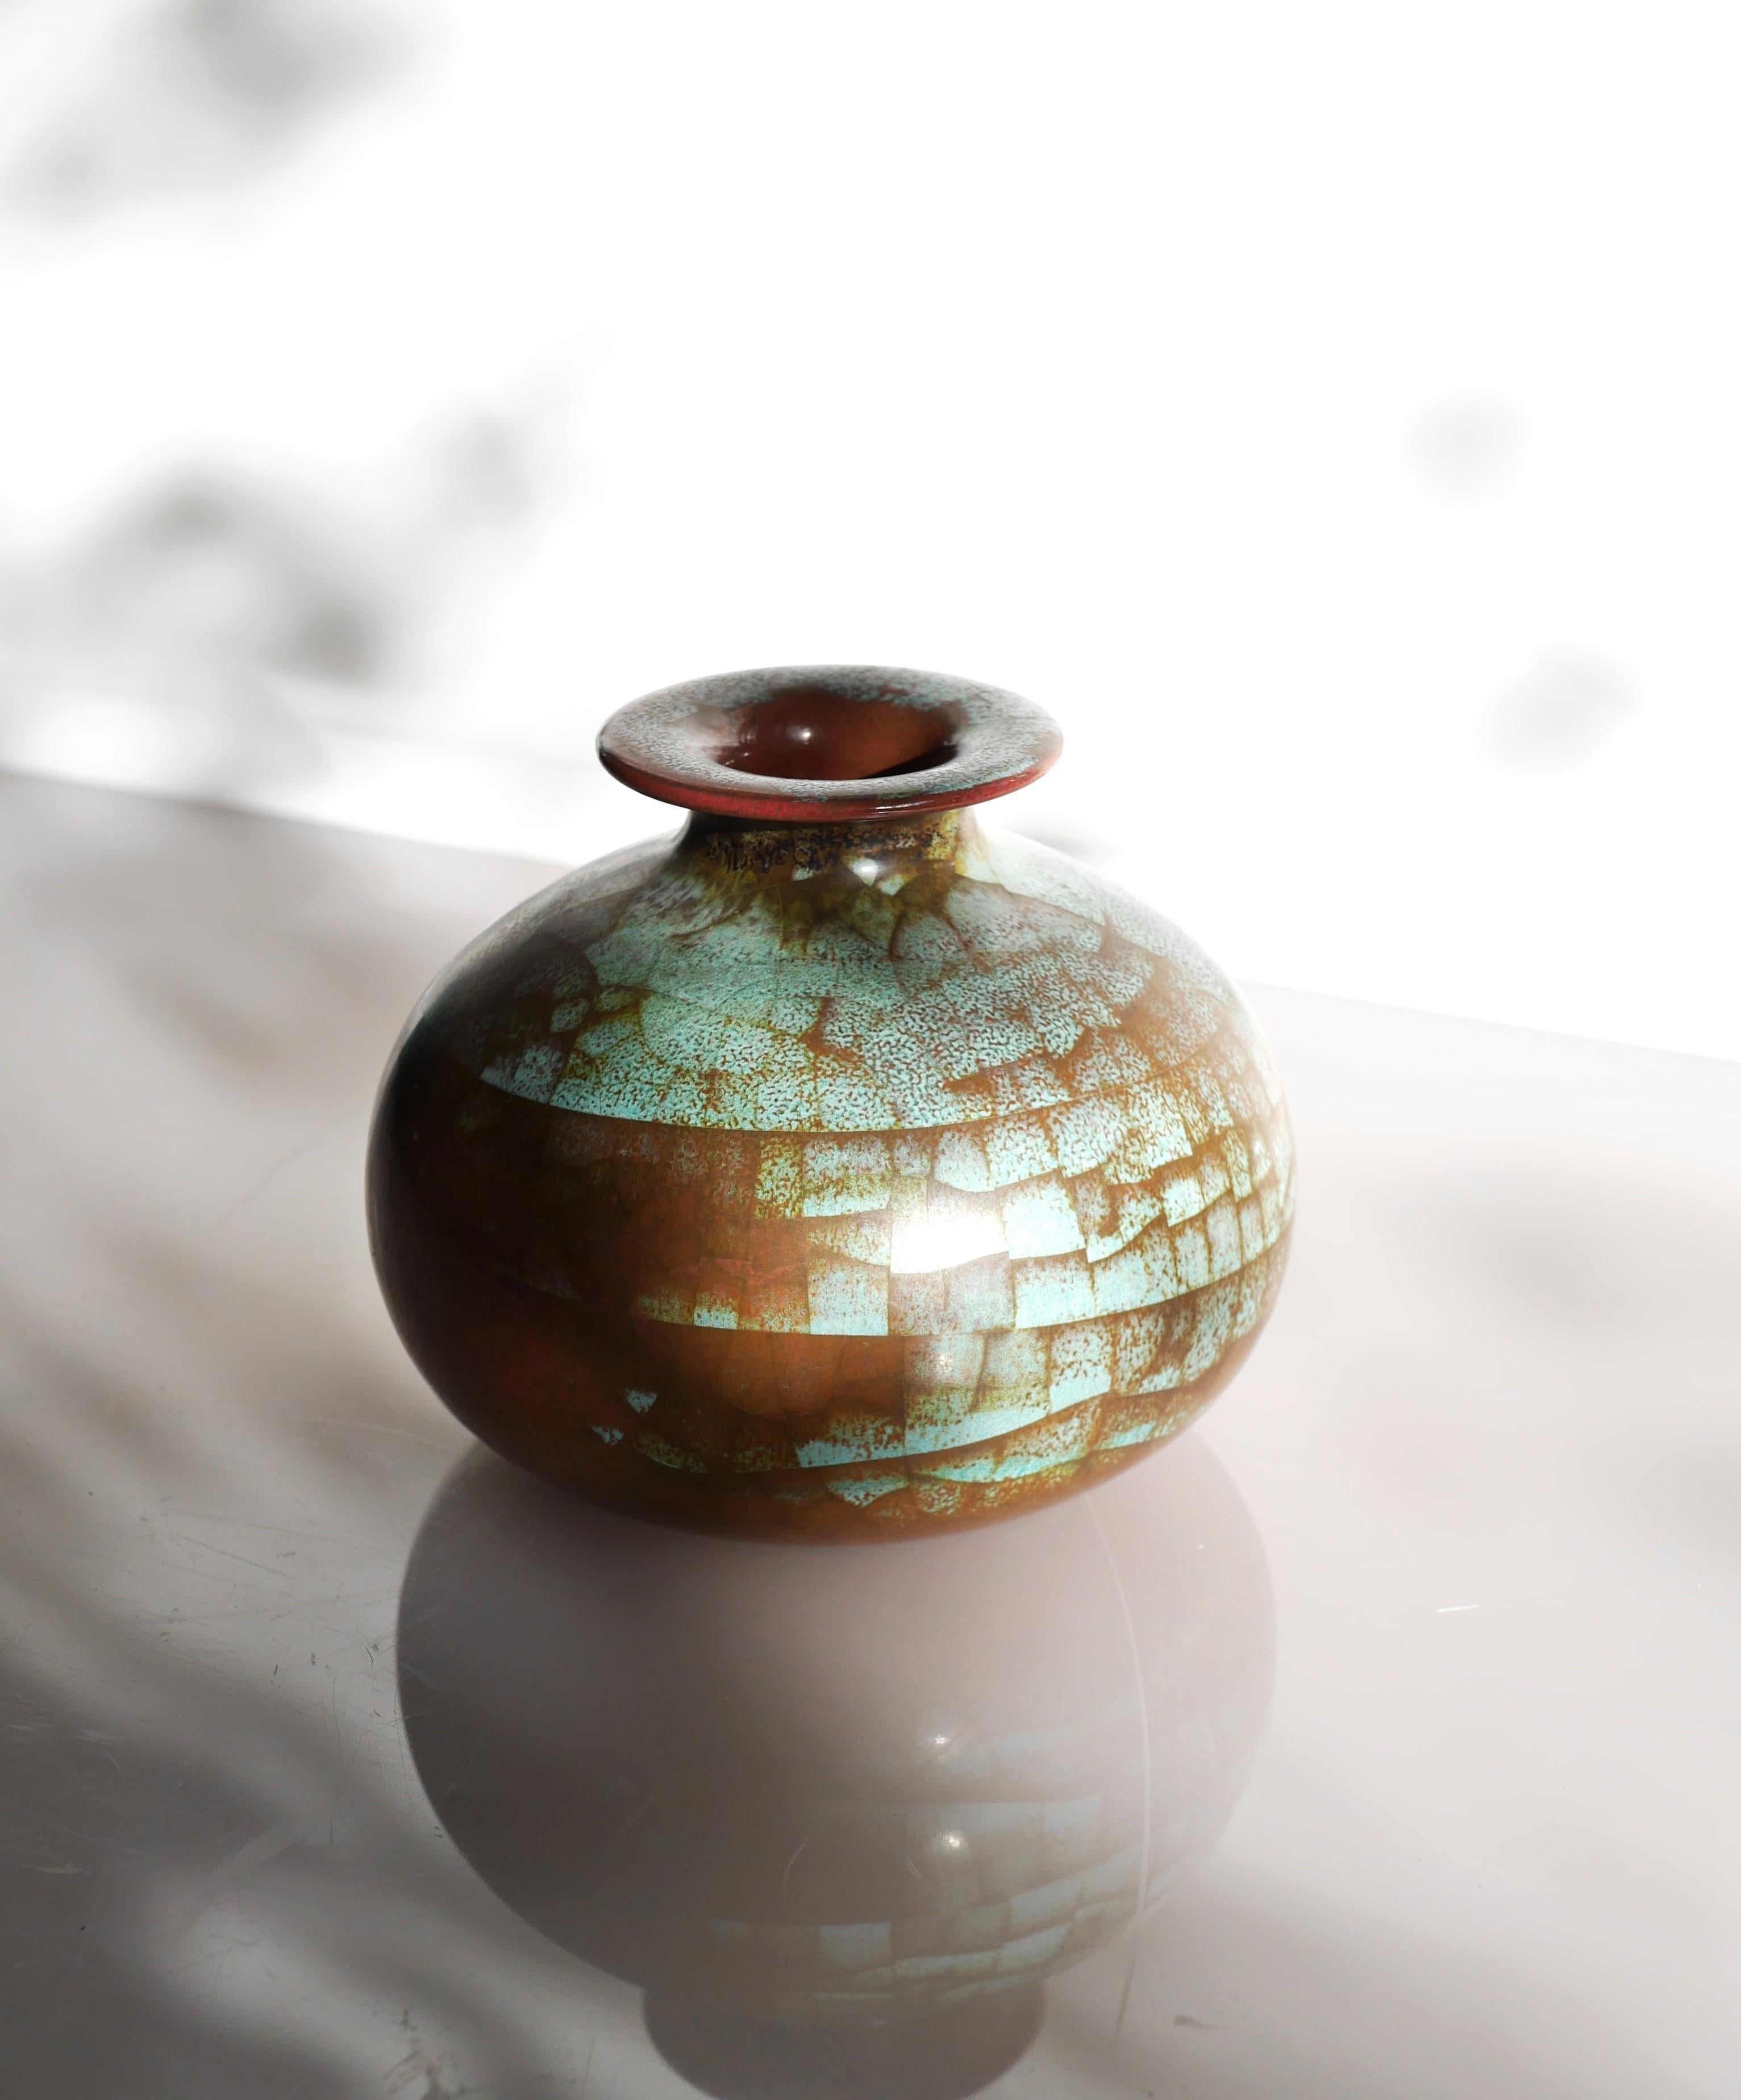 Mid-20th Century Mid-century modern pottery vase with Persia glaze from Michael Andersen, Denmark